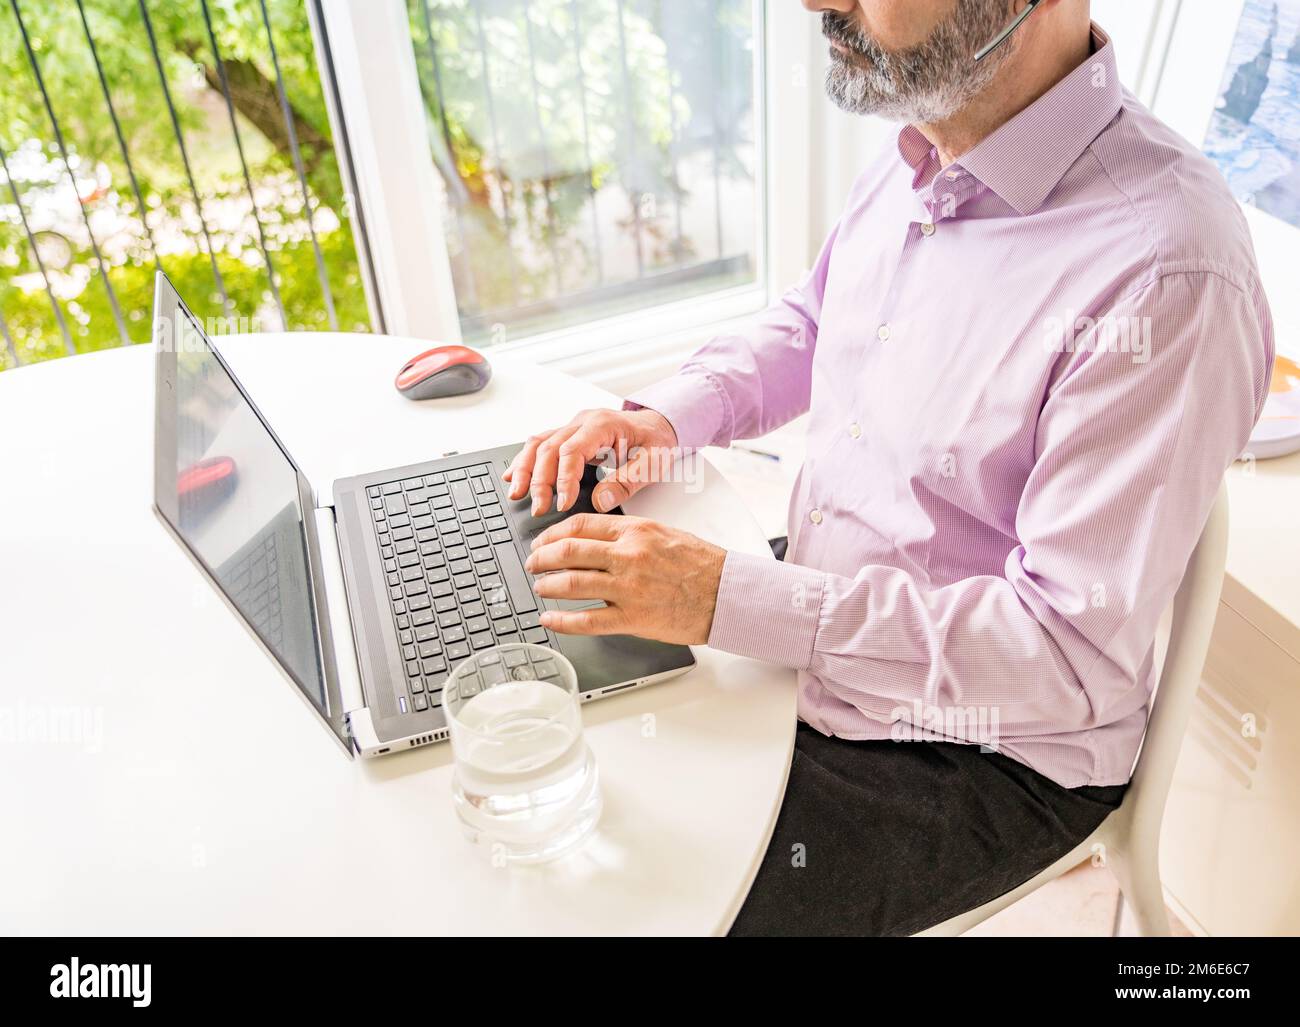 Man working with computer. Smart working Stock Photo